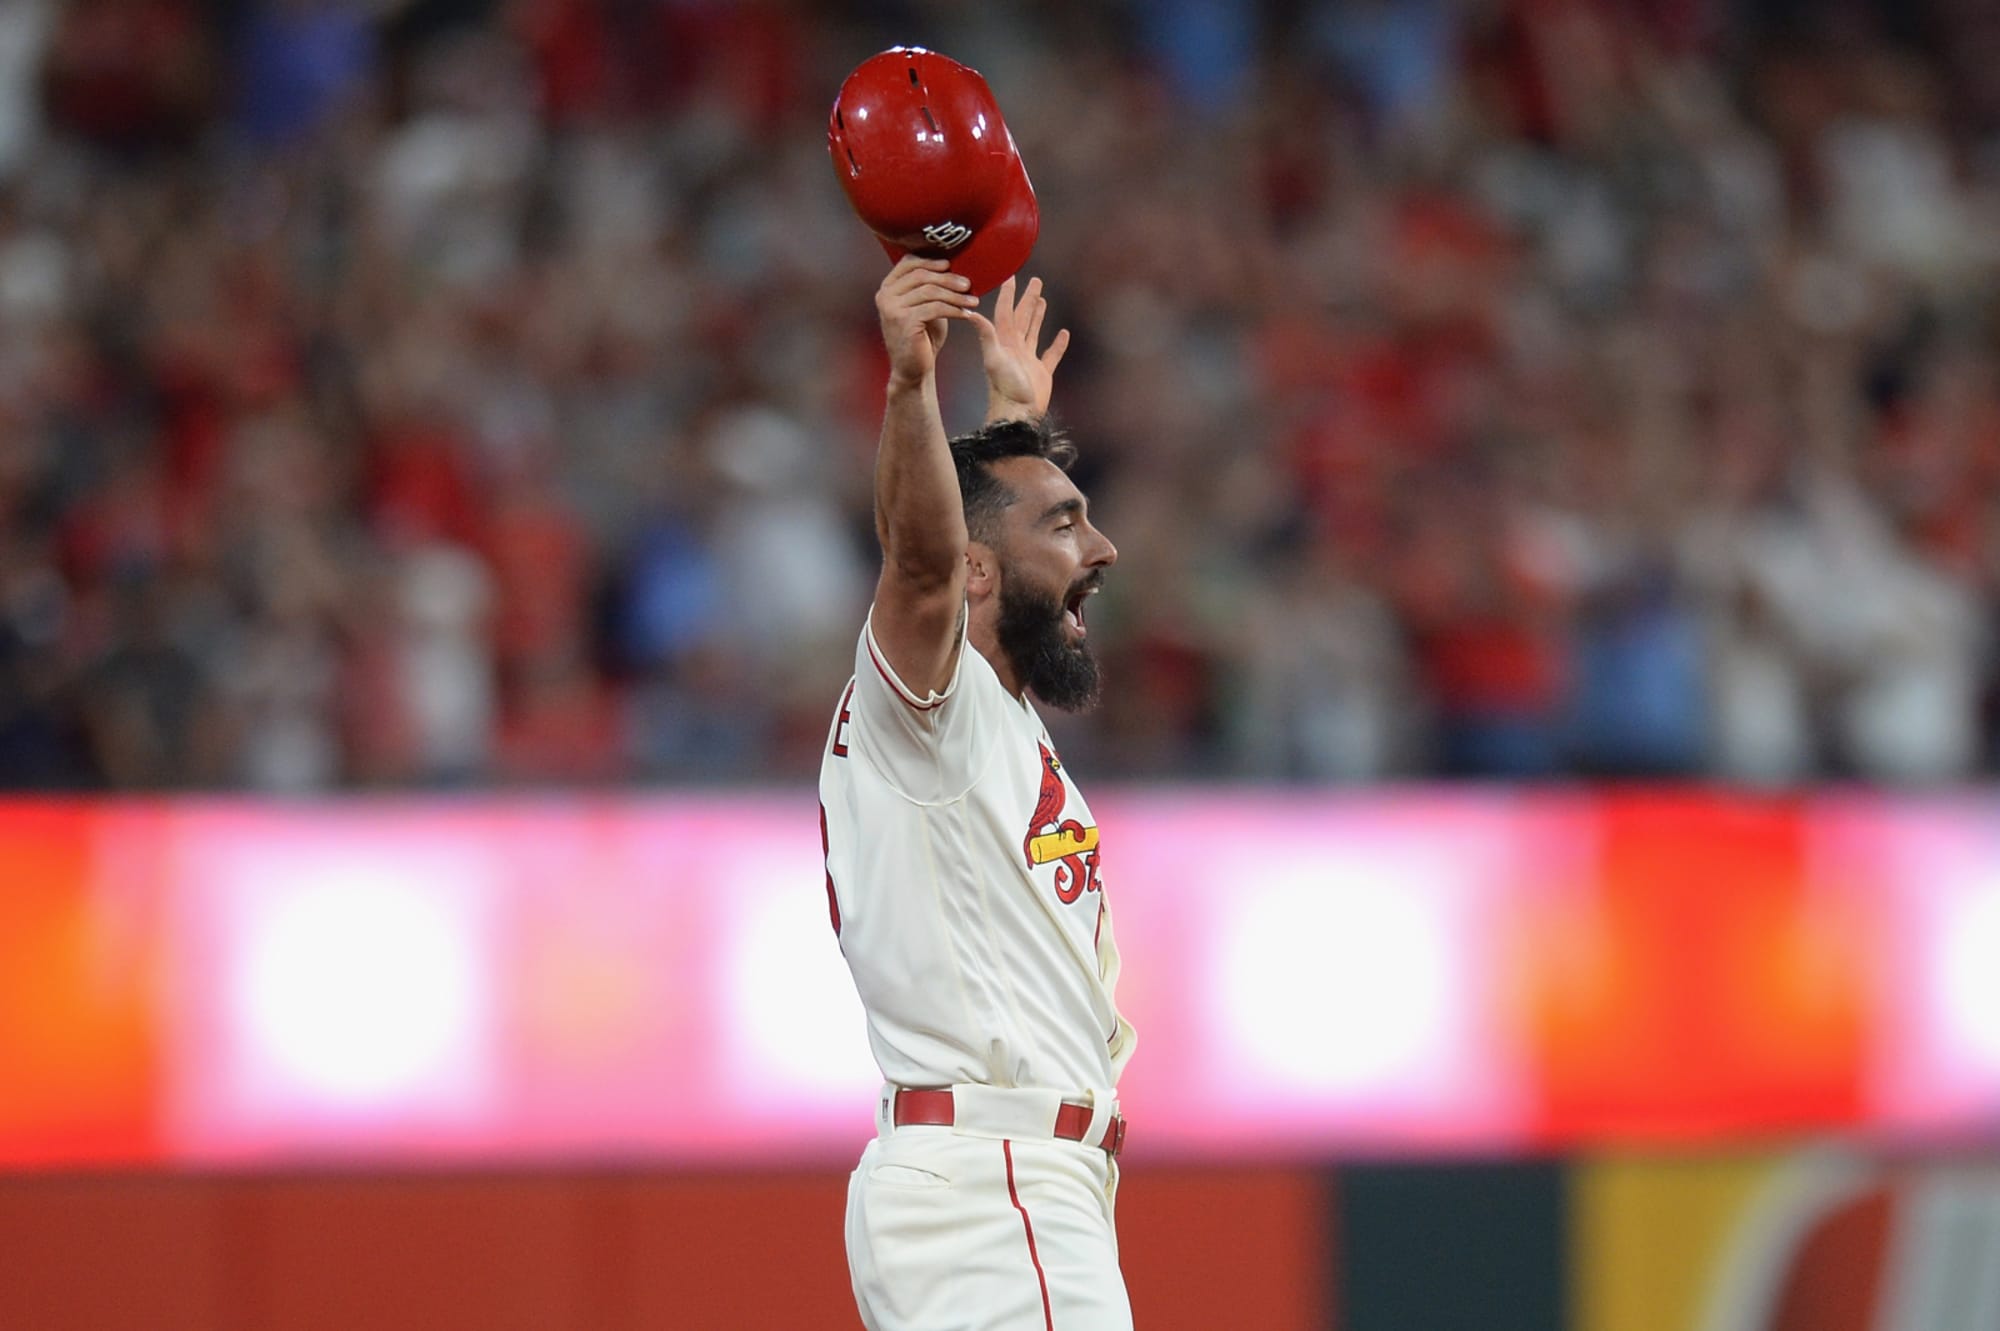 St. Louis Cardinals: Carpenter to rep the team in MLB The Show tourney